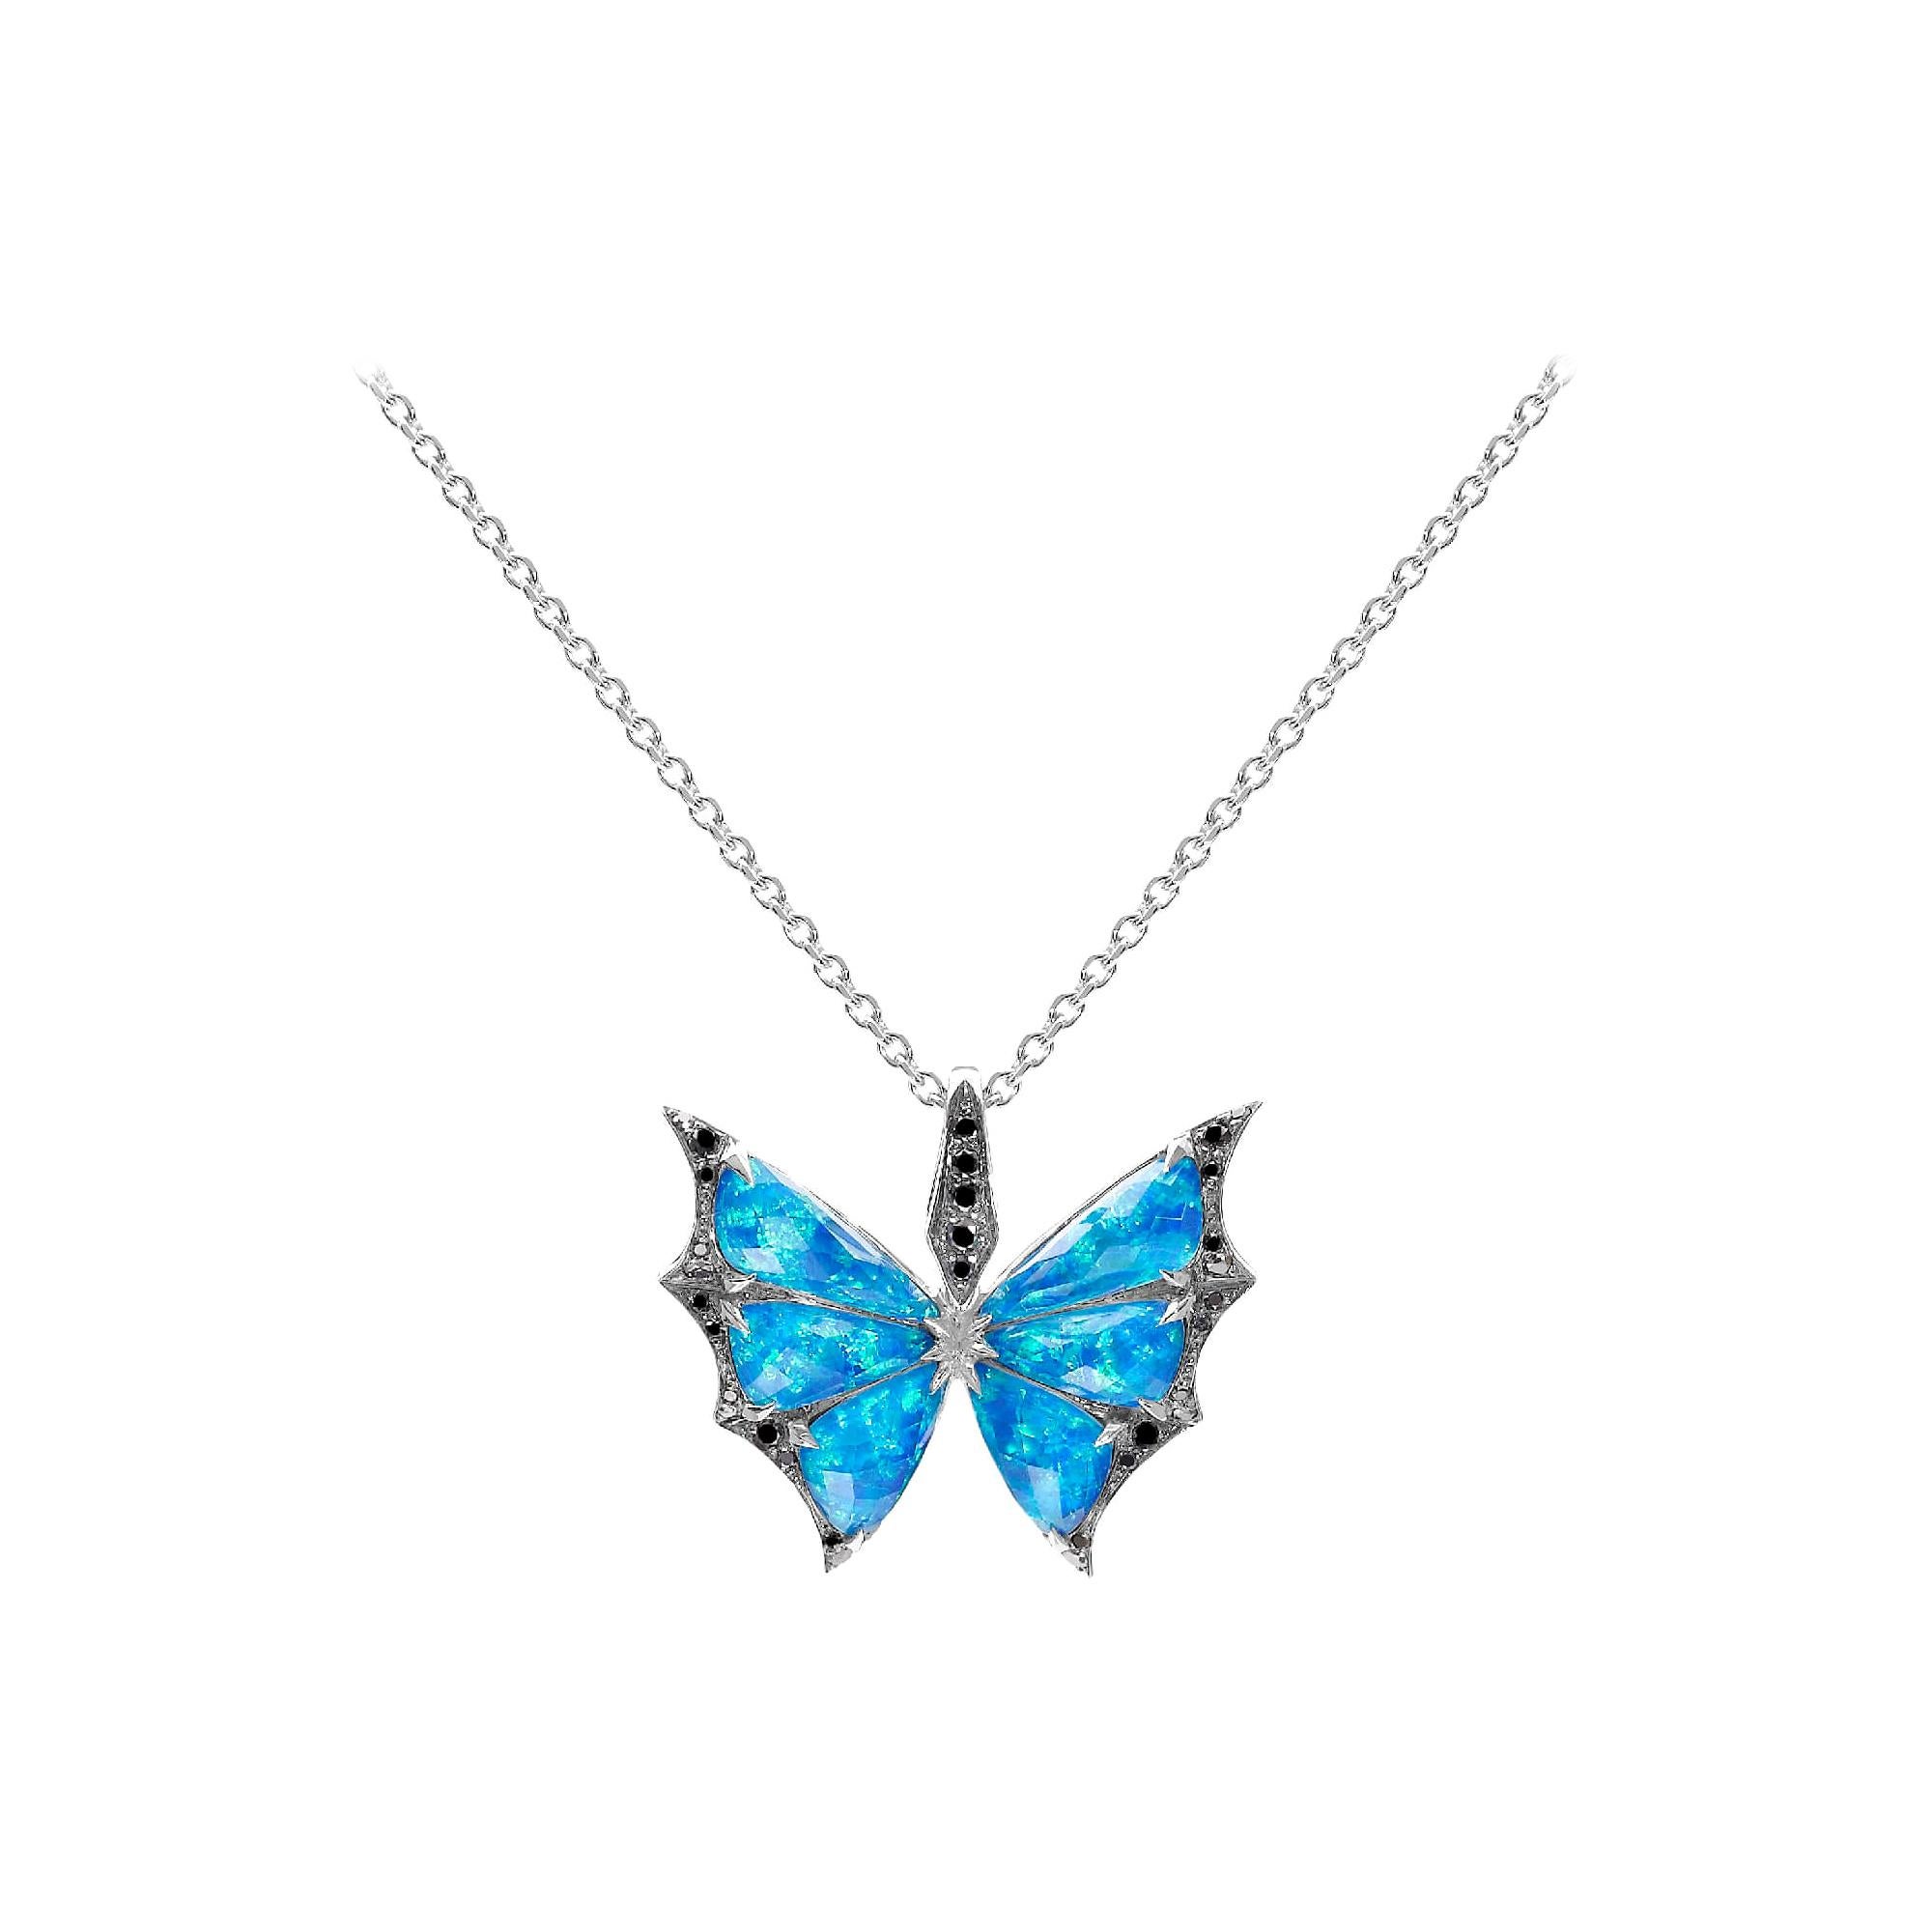 Stephen Webster Fly by Night Black Opalescent Crystal Haze and Diamond Pendant For Sale